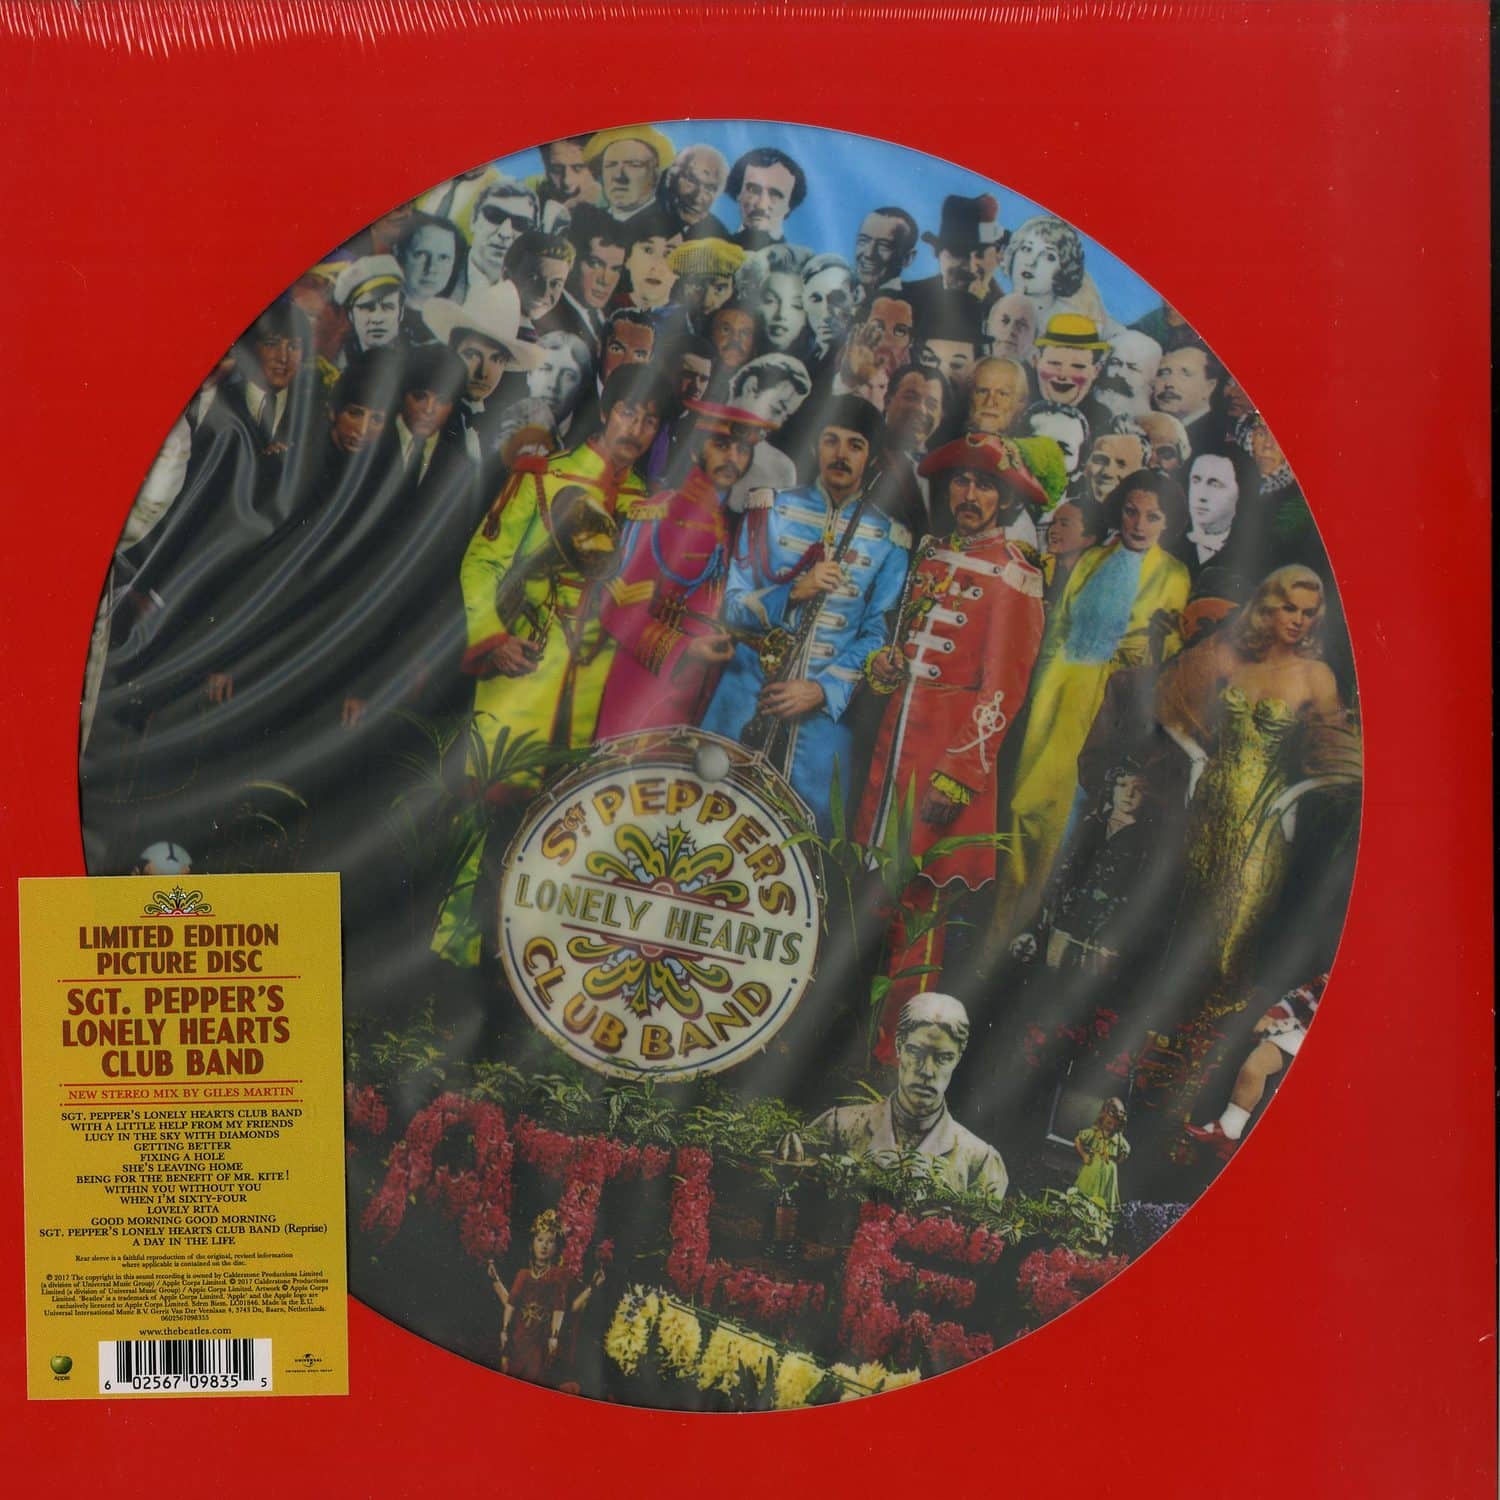 The Beatles - SGT. PEPPERS LONELY HEARTS CLUB BAND - ANNIVERSARY EDITION 